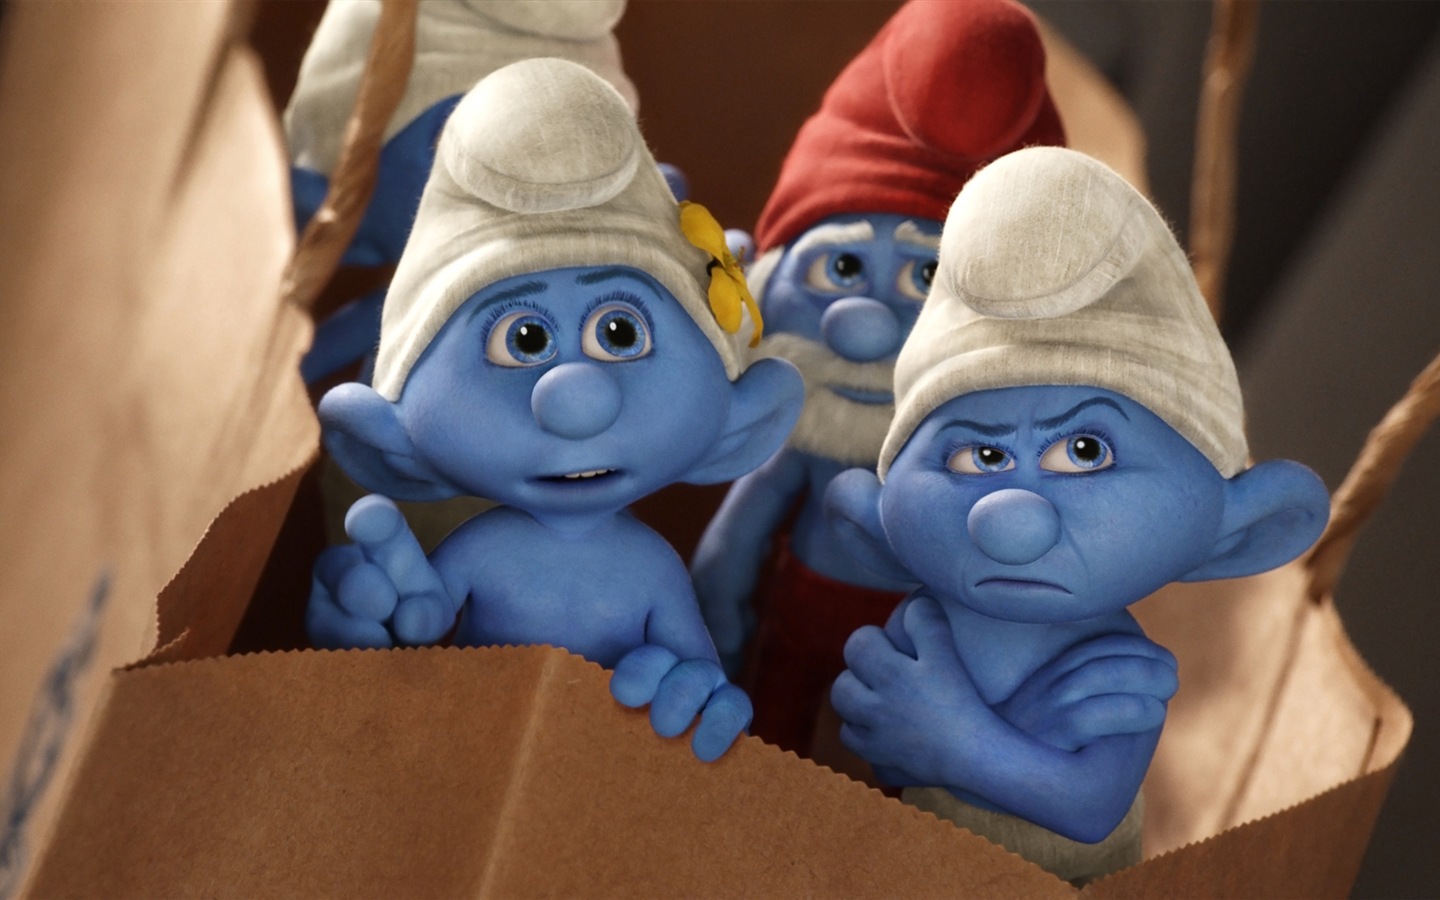 The Smurfs 2 HD movie wallpapers #12 - 1440x900